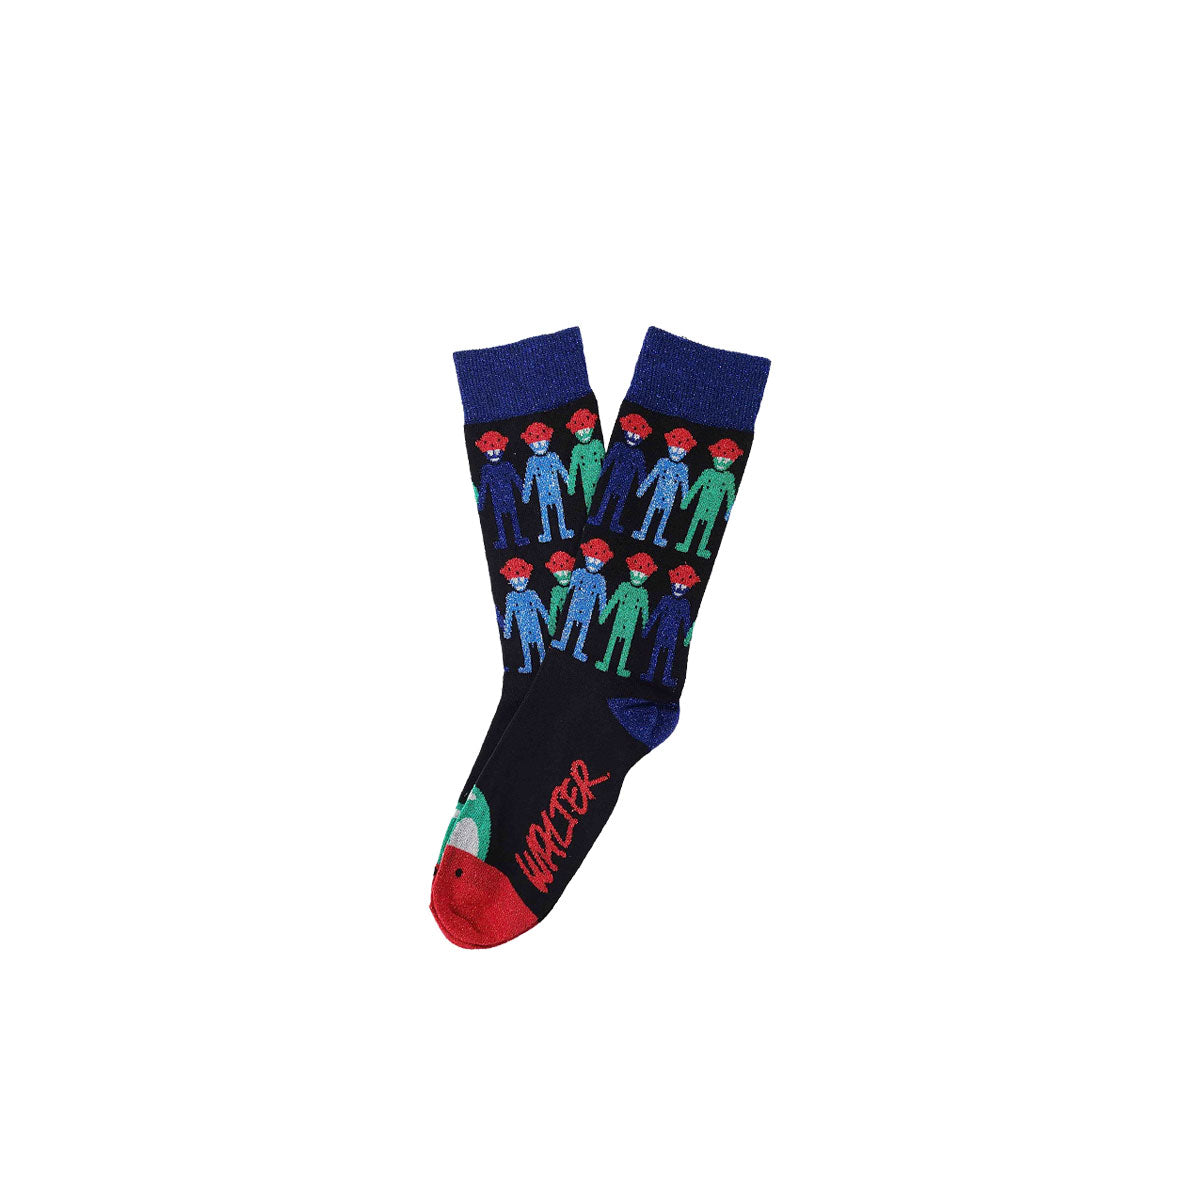 Aliens Unite Socks (LUREX) - Why are you here?